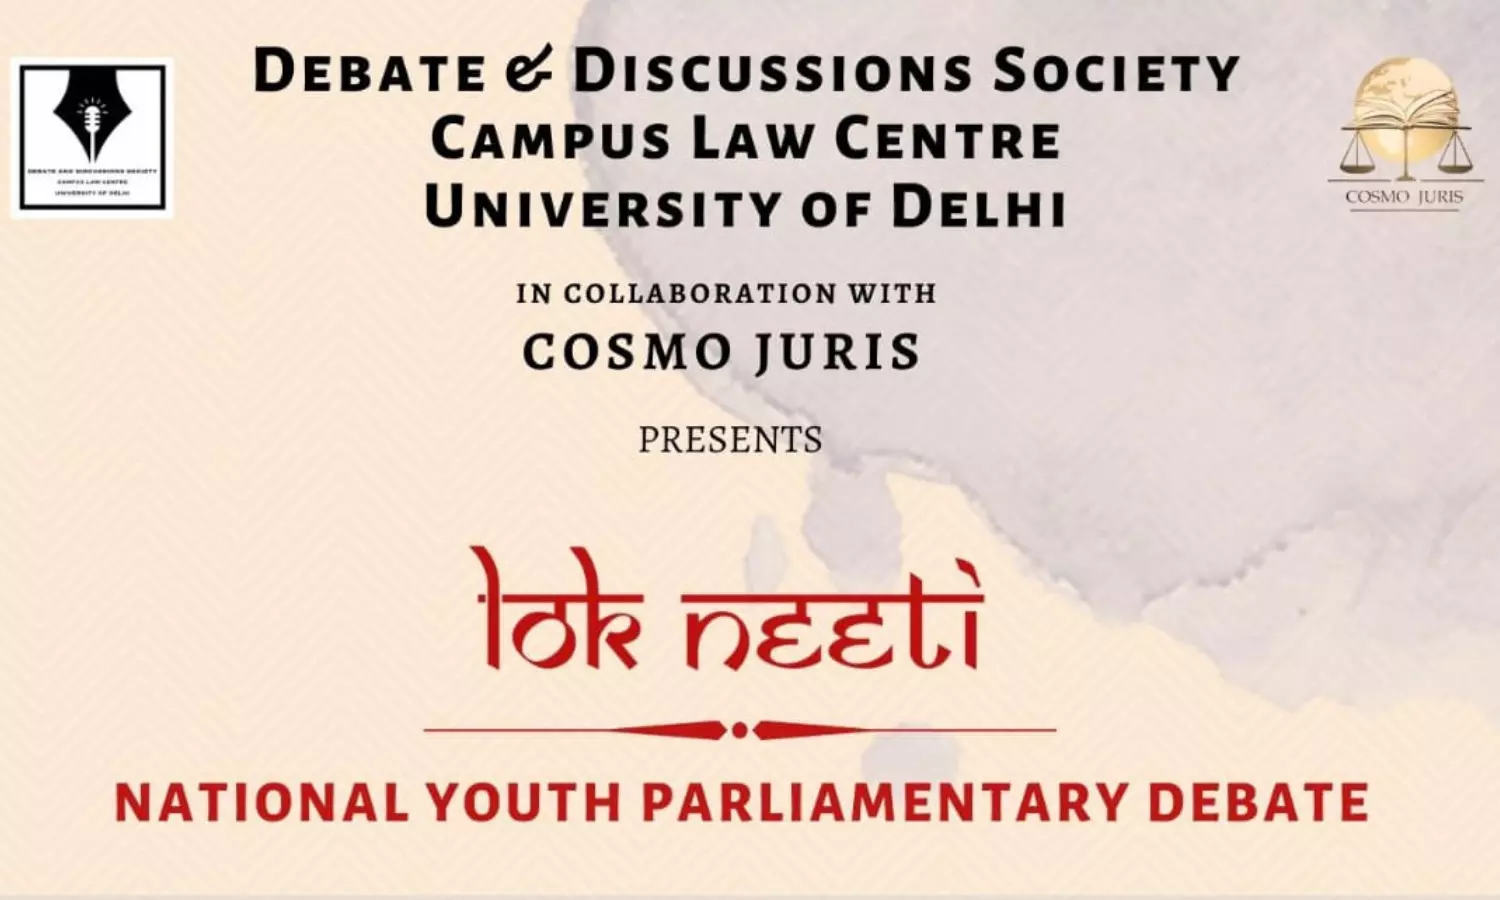 Lok Neeti 2023 - National Youth Parliamentary Debate | DDS, Campus Law Centre